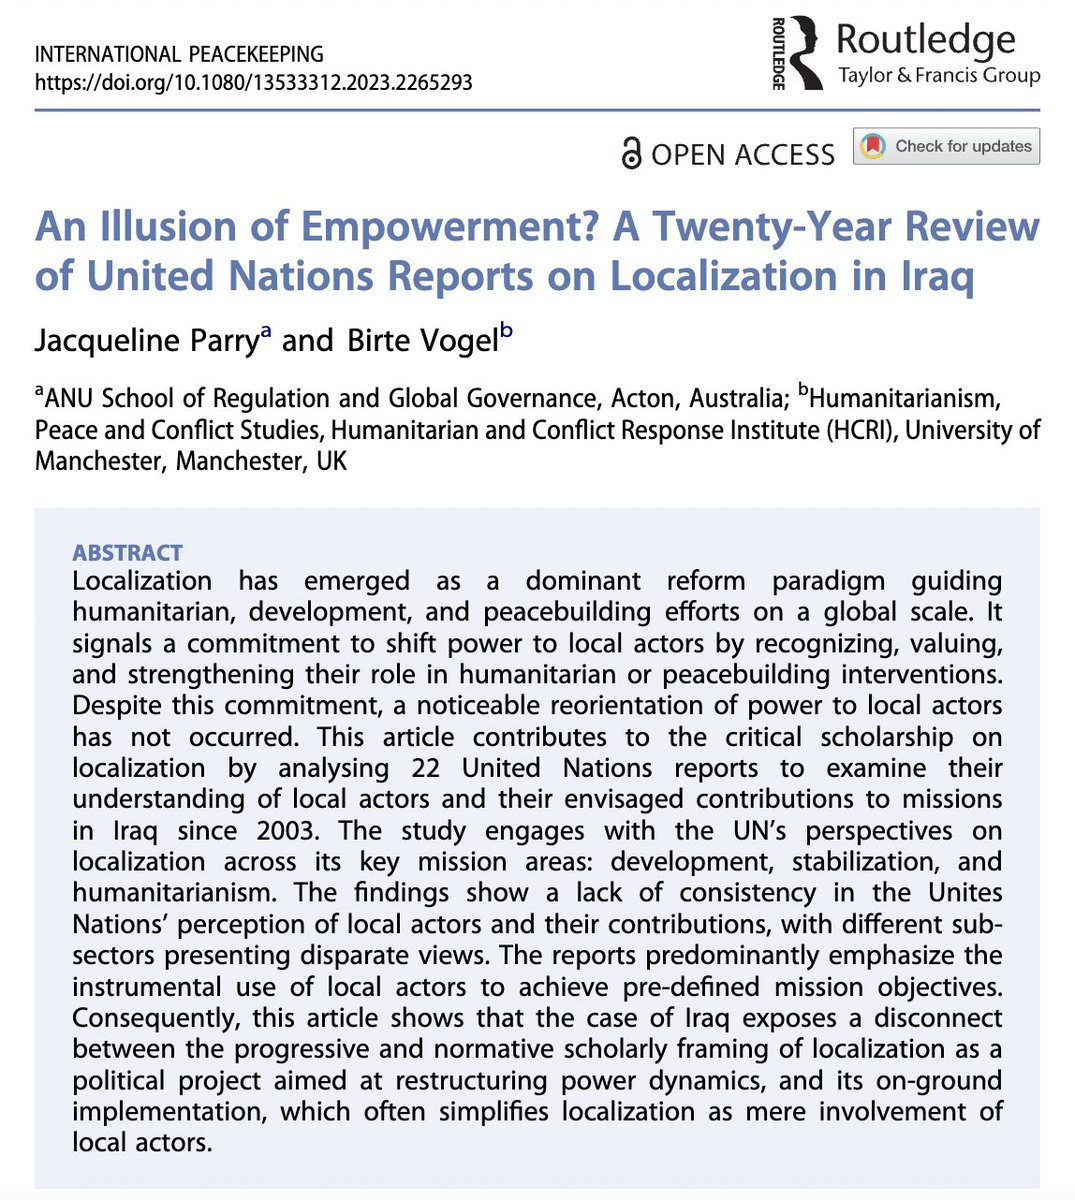 The next article published in the special issue we are editing on 20 years since the US invasion of #Iraq is by J.Parry and @birtevogel_. It gives a 20 year overview of UN localisation, demonstrating the disconnect between the literature and the field. ➡️ rb.gy/p1pdg